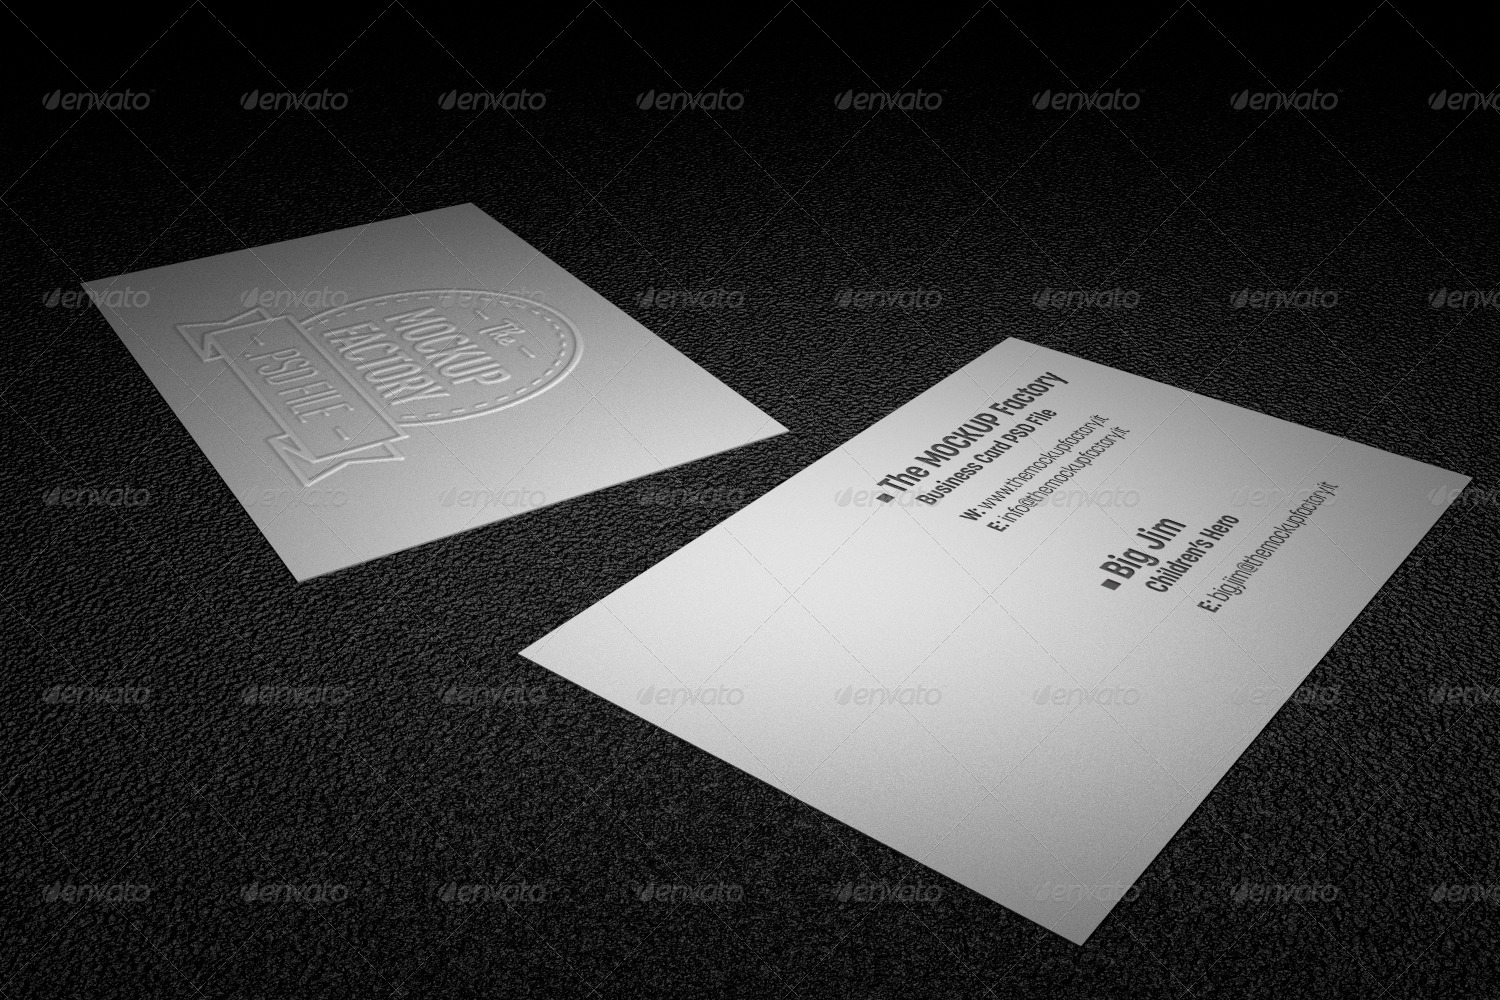 Download Photorealistic Embossed Business Card MockUp by themockupfactory | GraphicRiver